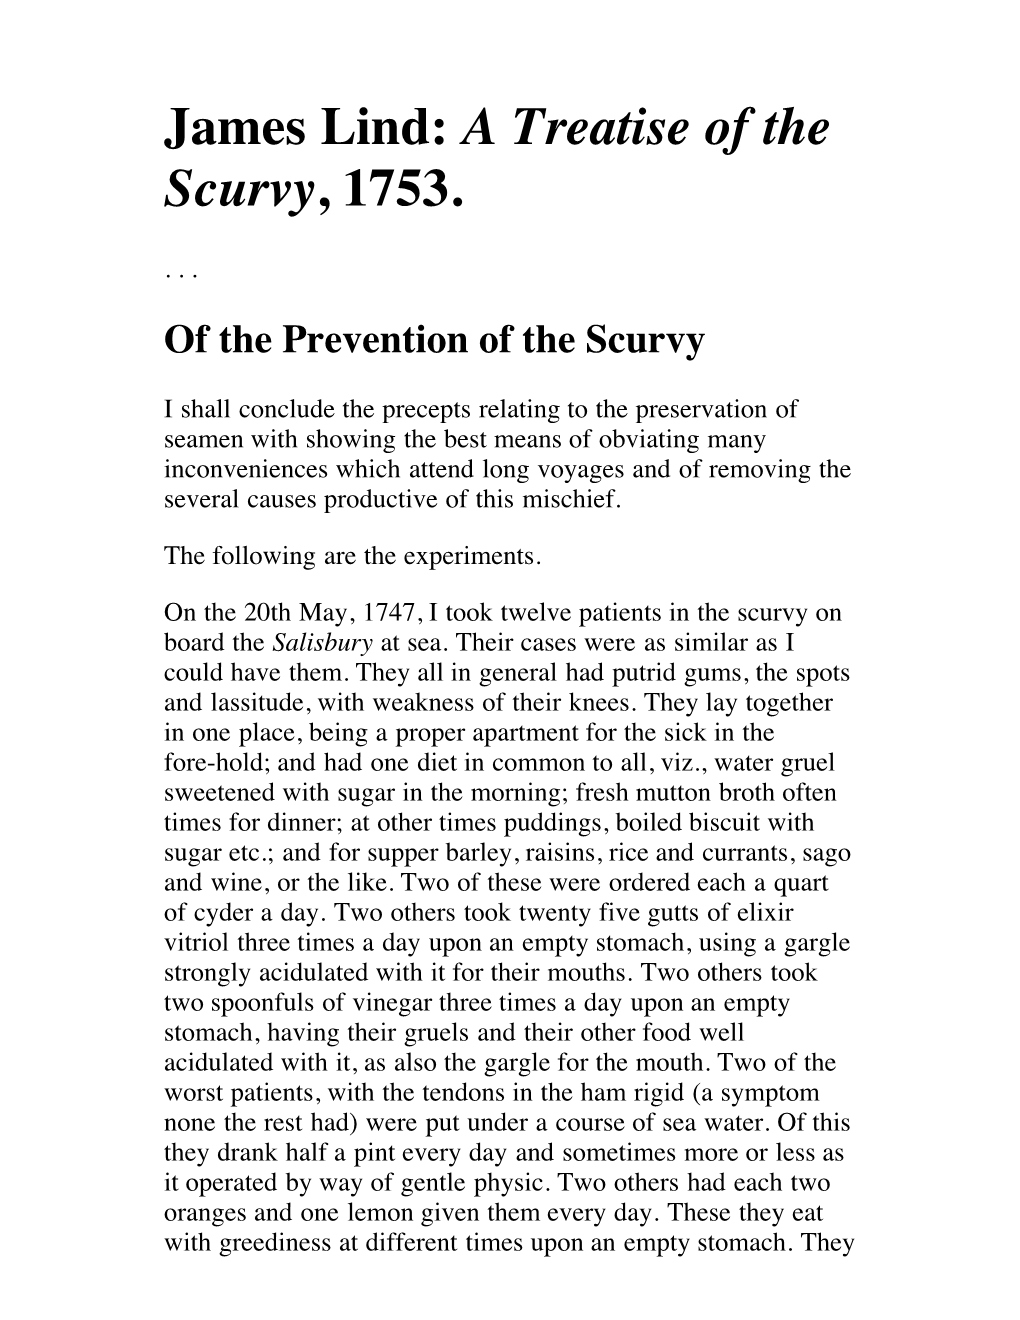 James Lind: a Treatise of the Scurvy, 1753